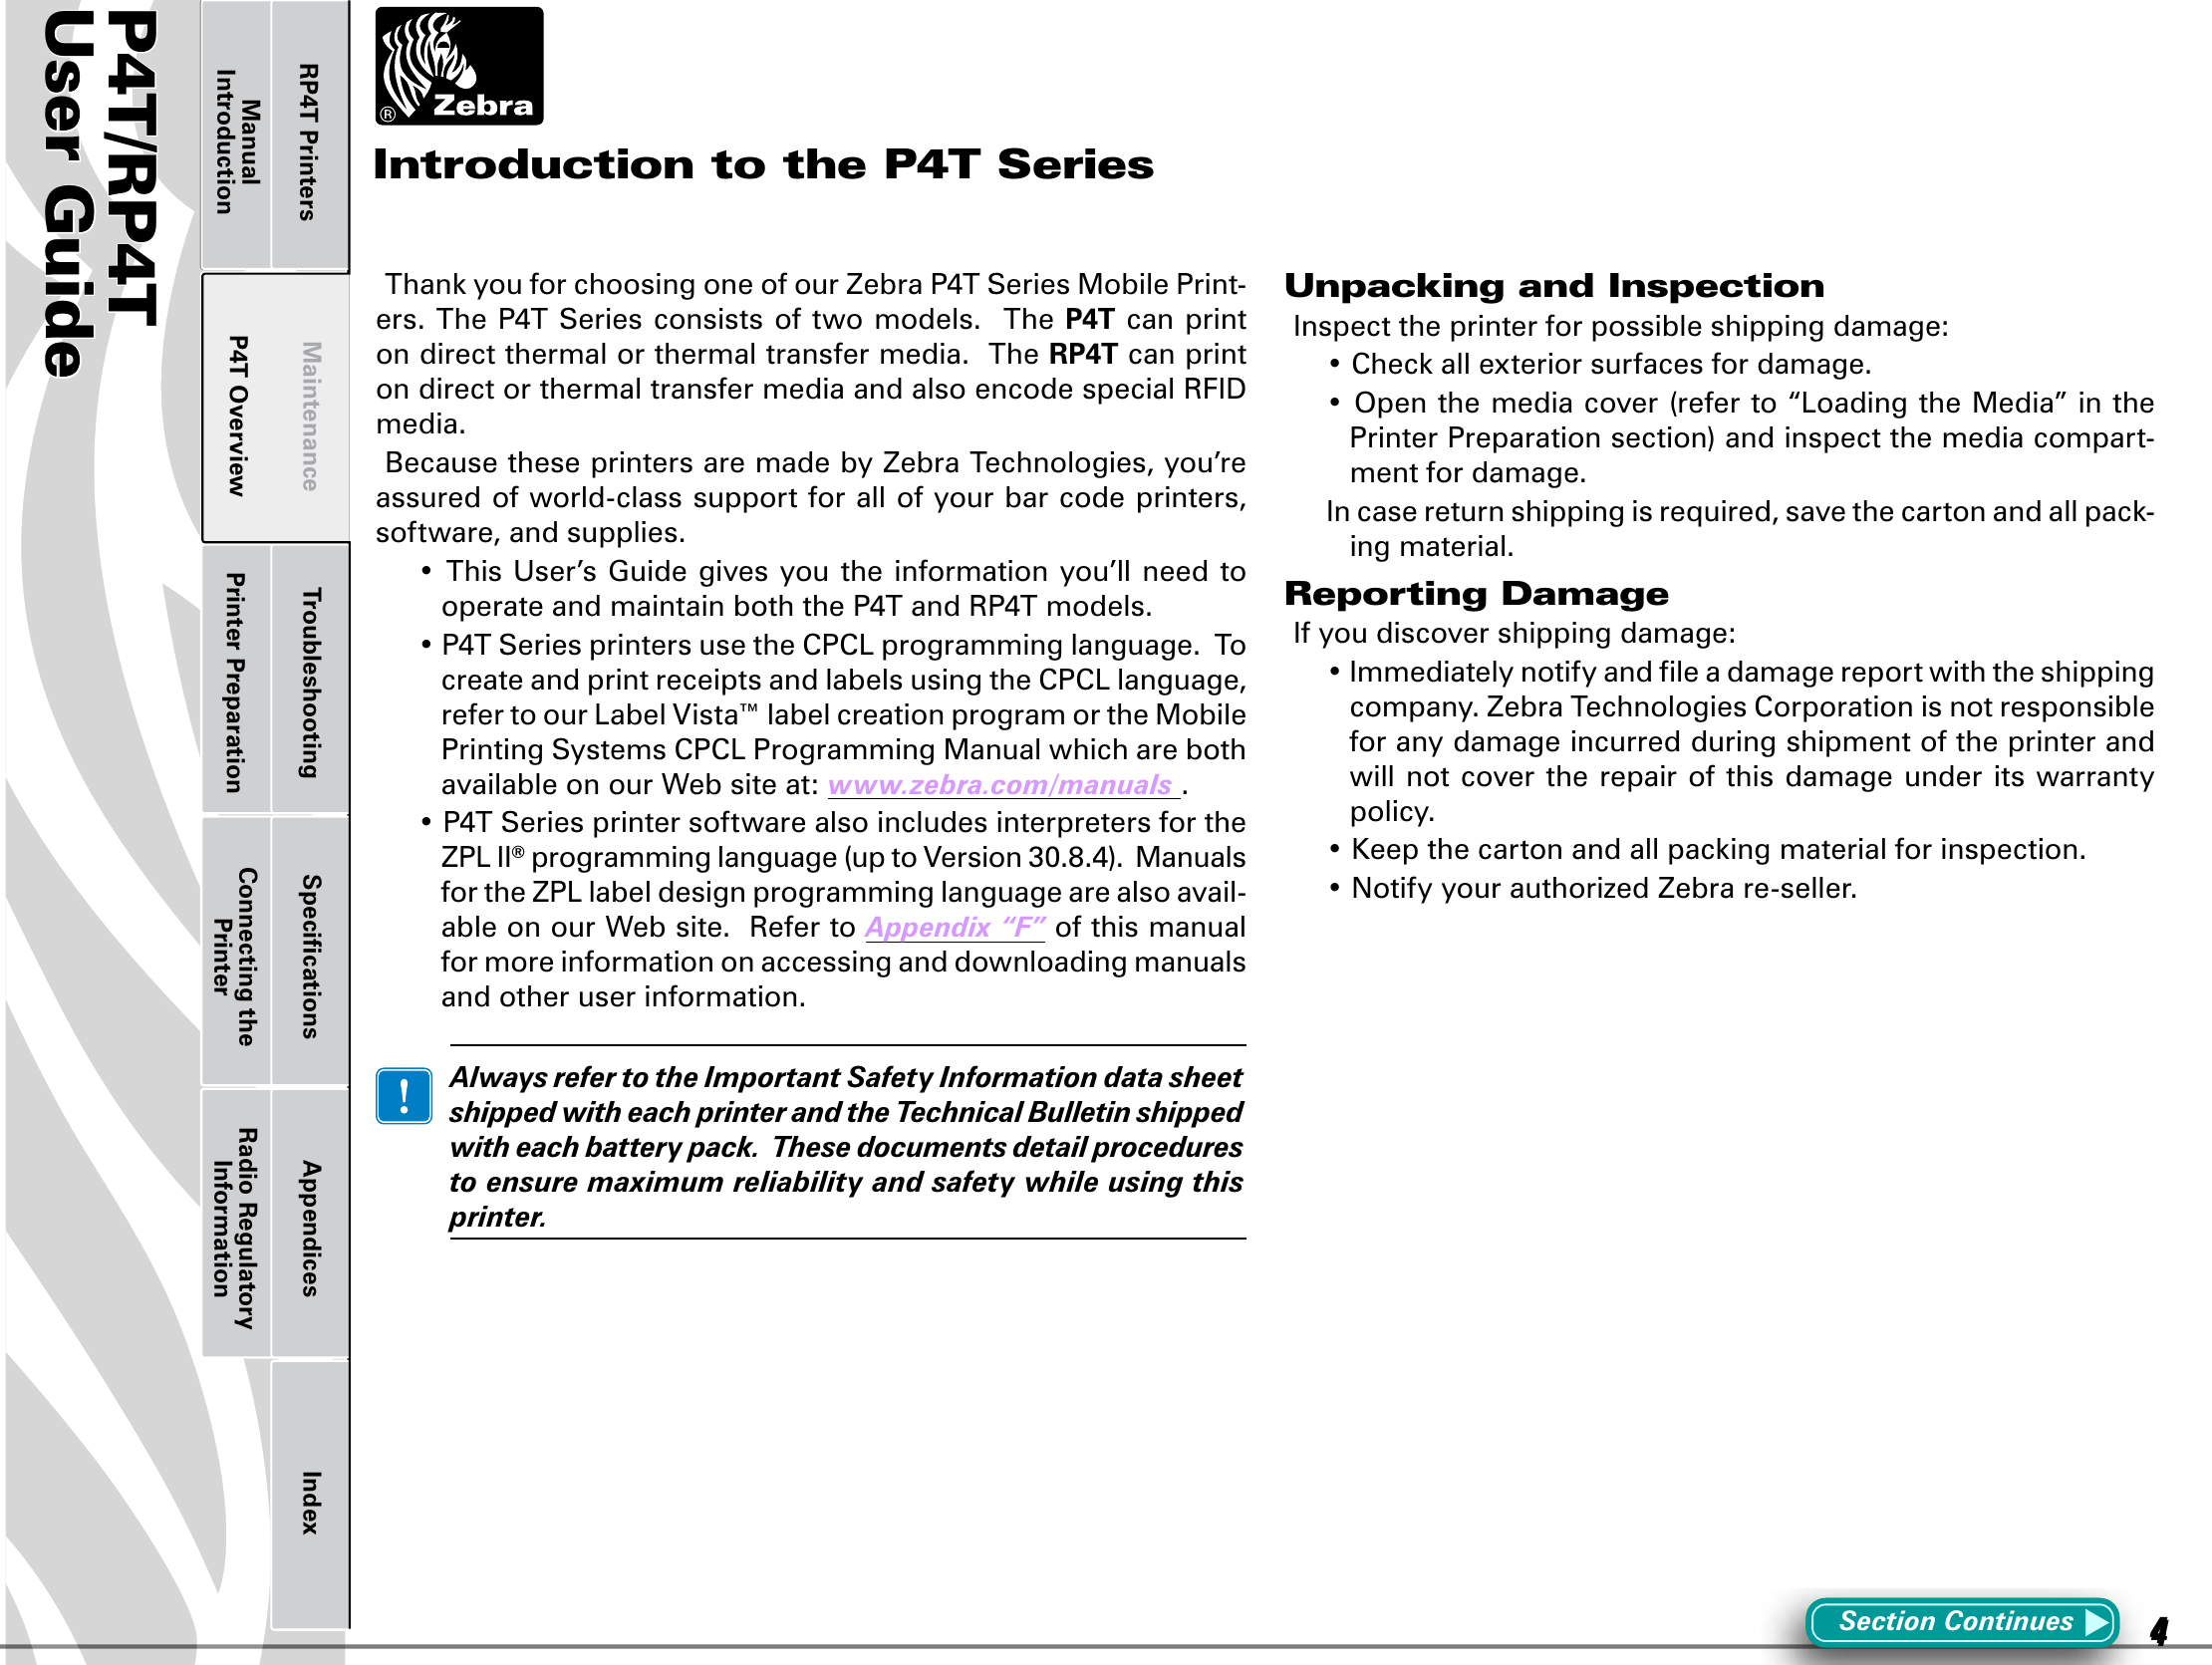 P4T/RP4TUser Guide 4P4T OverviewManual Introduction Printer Preparation Connecting the PrinterRadio Regulatory InformationRP4T Printers Maintenance Troubleshooting Speciﬁcations Appendices IndexP4TUser Guide 4Printer Preparation Connecting the PrinterRadio Regulatory InformationRP4T Printers Maintenance Troubleshooting Speciﬁcations Appendices IndexP4T OverviewManual IntroductionThankyouforchoosingoneofourZebraP4TSeriesMobilePrint-ers.TheP4TSeriesconsistsoftwomodels.TheP4T can print on direct thermal or thermal transfer media.  The RP4T can print ondirectorthermaltransfermediaandalsoencodespecialRFIDmedia.Because these printers are made by Zebra Technologies, you’re assured of world-class support for all of your bar code printers, software, and supplies.•ThisUser’sGuidegivesyoutheinformationyou’llneedtooperateandmaintainboththeP4TandRP4Tmodels.•P4TSeriesprintersusetheCPCLprogramminglanguage.TocreateandprintreceiptsandlabelsusingtheCPCLlanguage,refertoourLabelVista™labelcreationprogramortheMobilePrintingSystemsCPCLProgrammingManualwhicharebothavailable on our Web site at: www.zebra.com/manuals.•P4TSeriesprintersoftwarealsoincludesinterpretersfortheZPLII®programminglanguage(uptoVersion30.8.4).ManualsfortheZPLlabeldesignprogramminglanguagearealsoavail-able on our Web site.  Refer to Appendix“F” of this manual for more information on accessing and downloading manuals and other user information. AlwaysrefertotheImportantSafetyInformationdatasheetshippedwitheachprinterandtheTechnicalBulletinshippedwitheachbatterypack.Thesedocumentsdetailprocedurestoensuremaximumreliabilityandsafetywhileusingthisprinter.Unpacking and InspectionInspect the printer for possible shipping damage:•Checkallexteriorsurfacesfordamage.•Openthemediacover(referto“LoadingtheMedia”inthePrinterPreparationsection)andinspectthemediacompart-ment for damage.Incasereturnshippingisrequired,savethecartonandallpack-ing material.Reporting DamageIf you discover shipping damage:•Immediatelynotifyandleadamagereportwiththeshippingcompany. Zebra Technologies Corporation is not responsible for any damage incurred during shipment of the printer and will not cover  the repair of this damage under its warranty policy.•Keepthecartonandallpackingmaterialforinspection.•NotifyyourauthorizedZebrare-seller.Section ContinuesIntroduction to the P4T Series